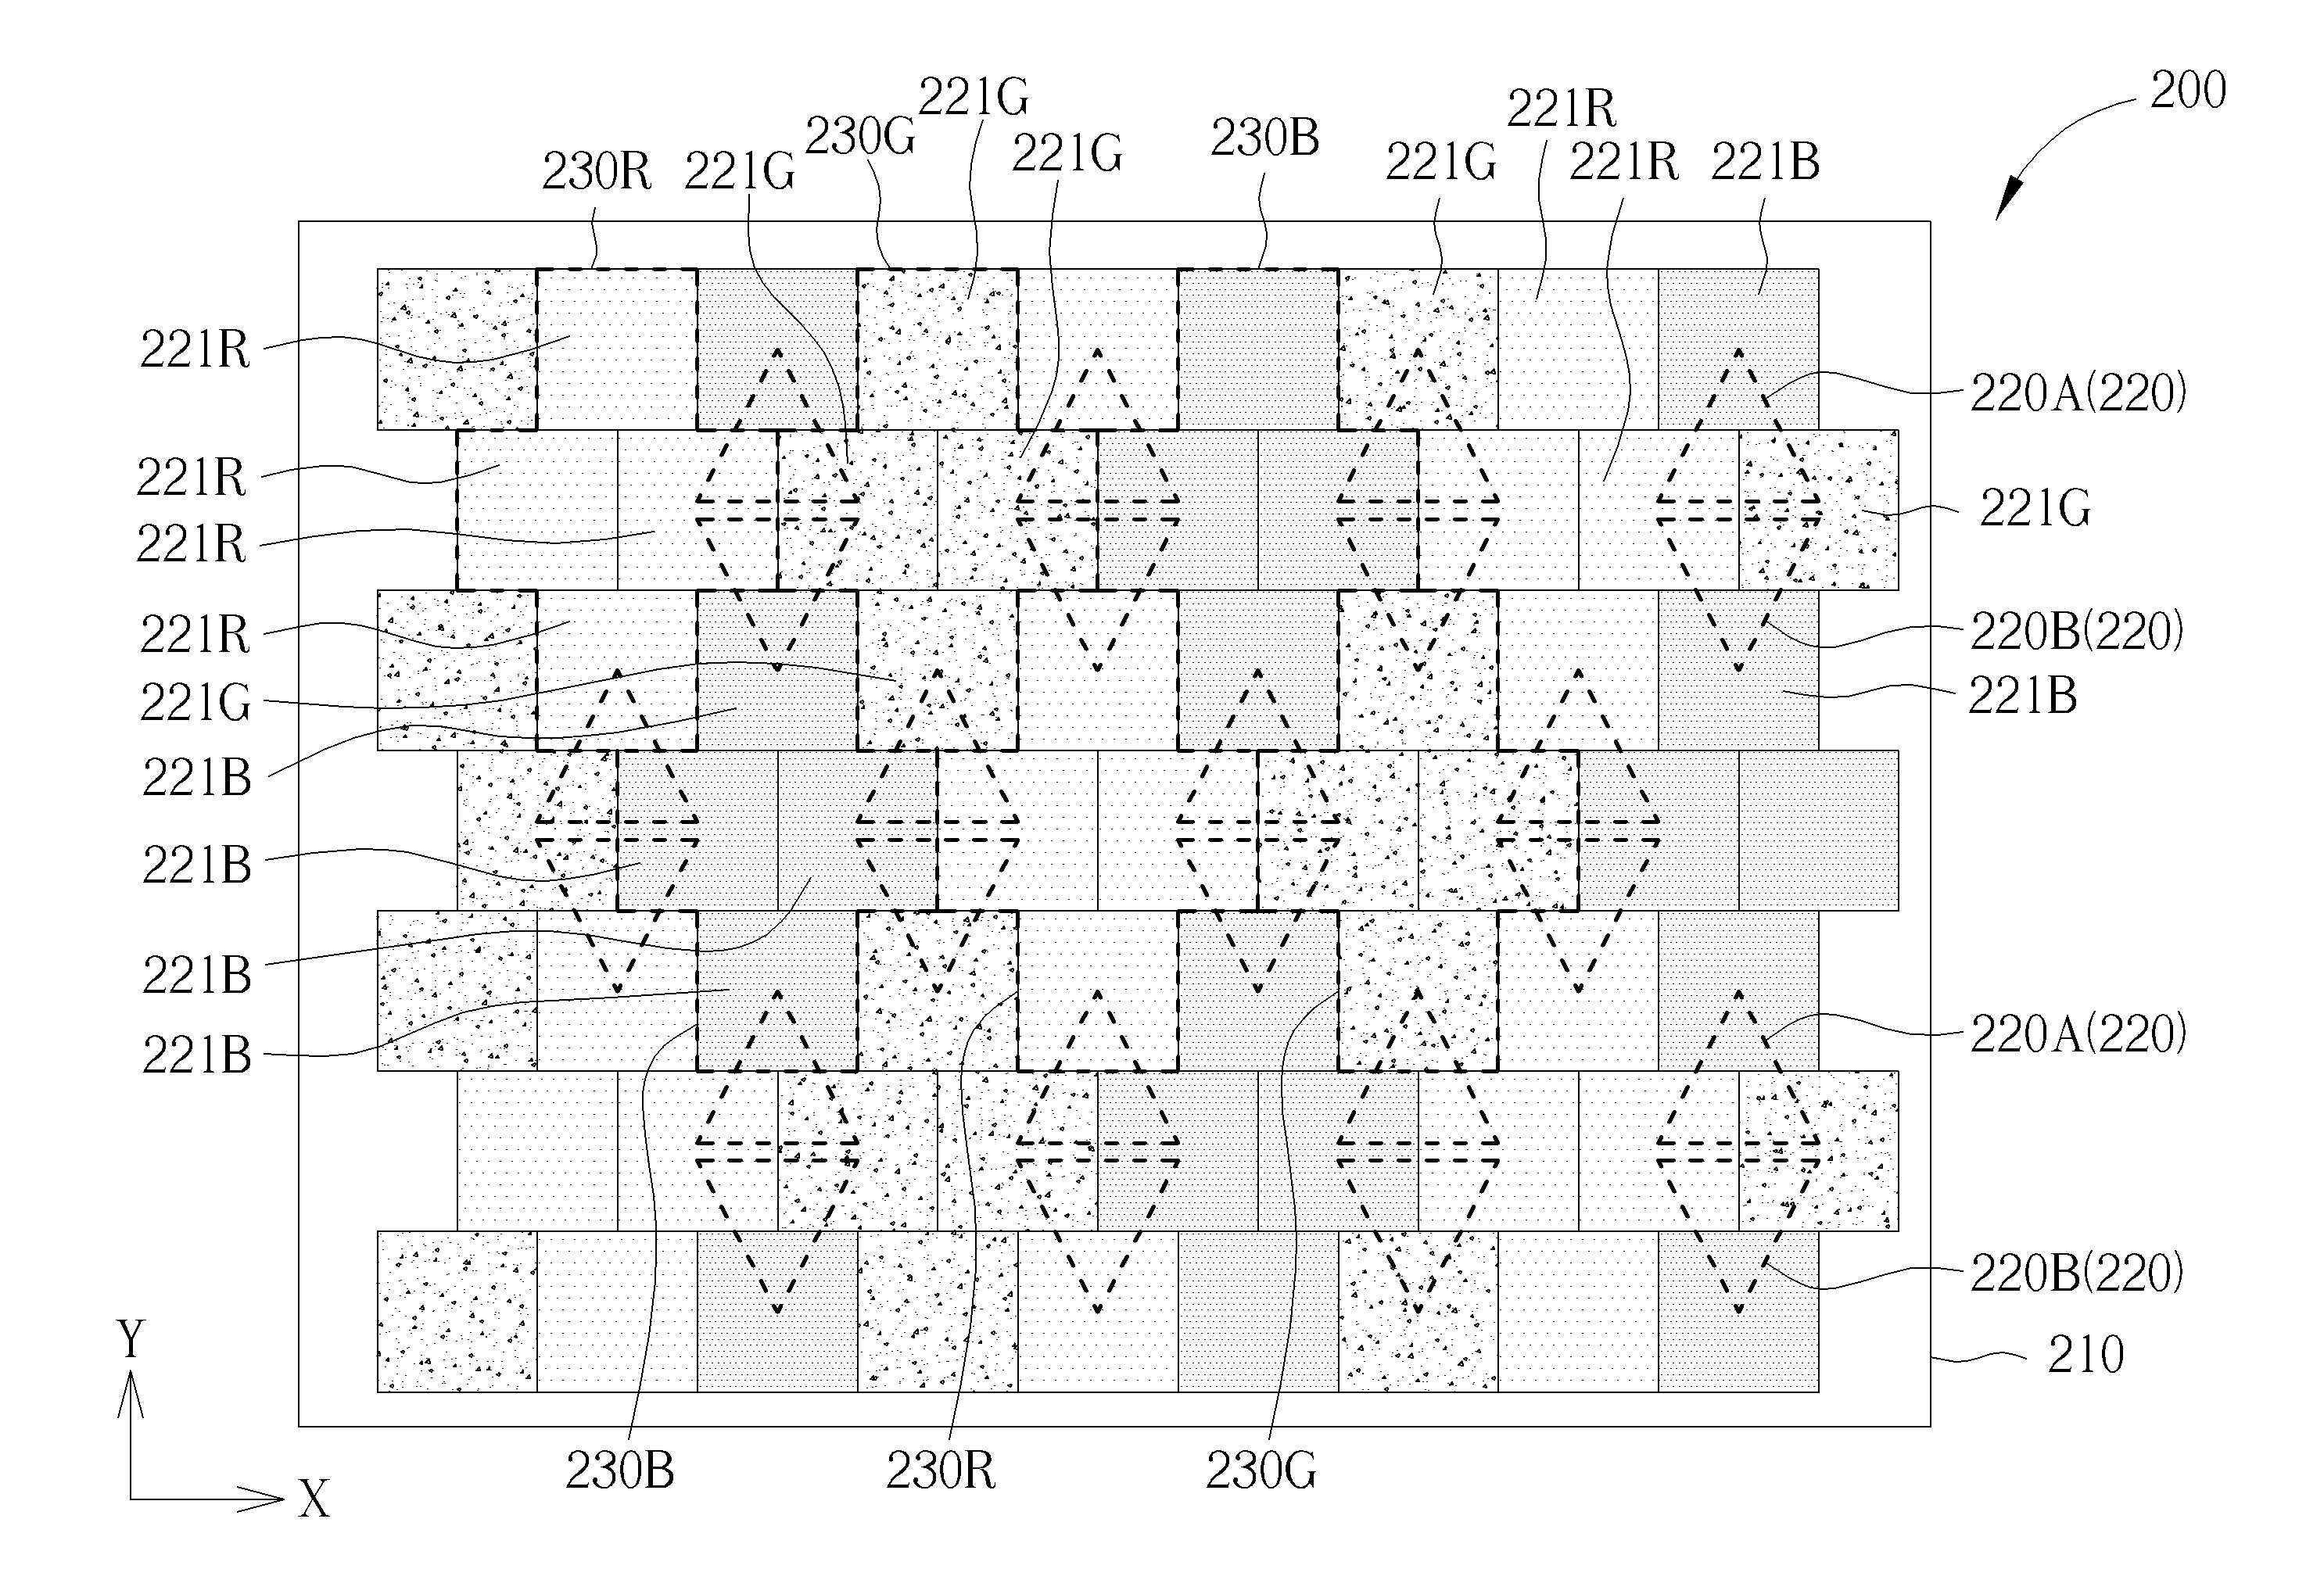 Pixel structure of organic light emitting display device